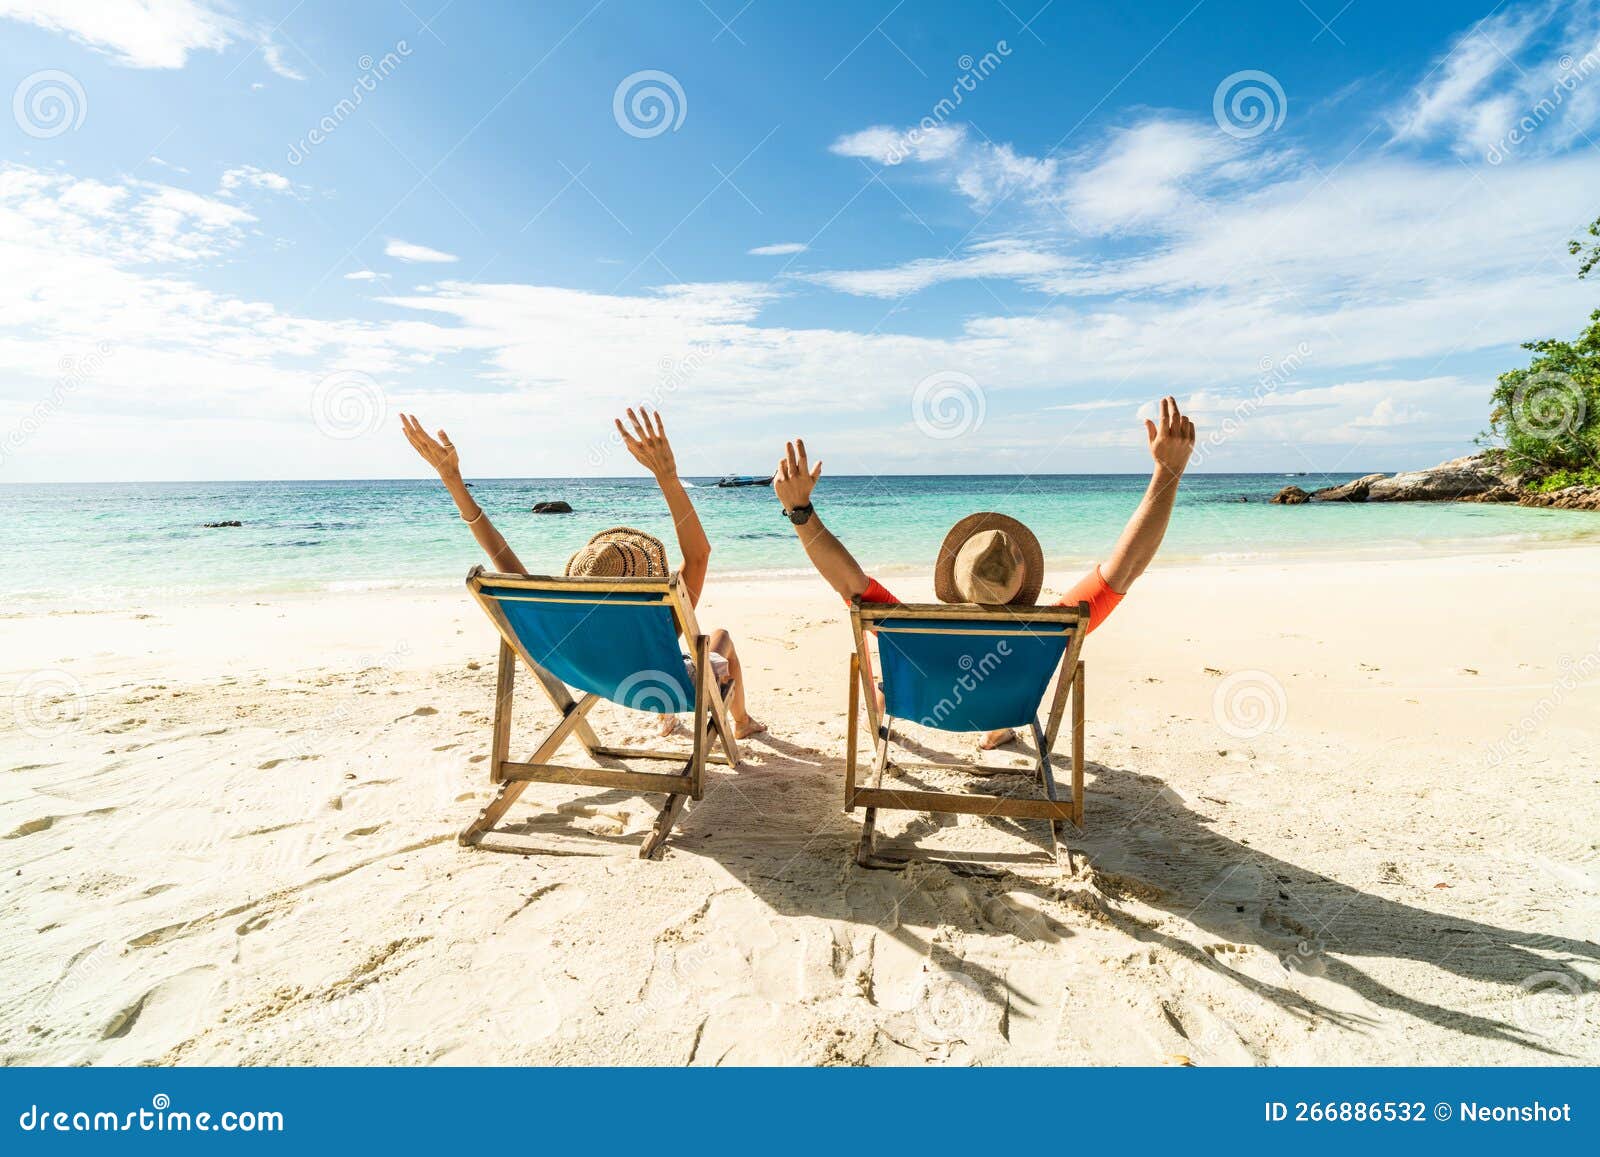 Two Happy People Having Fun On The Beach Sitting On Blue Sunbed With